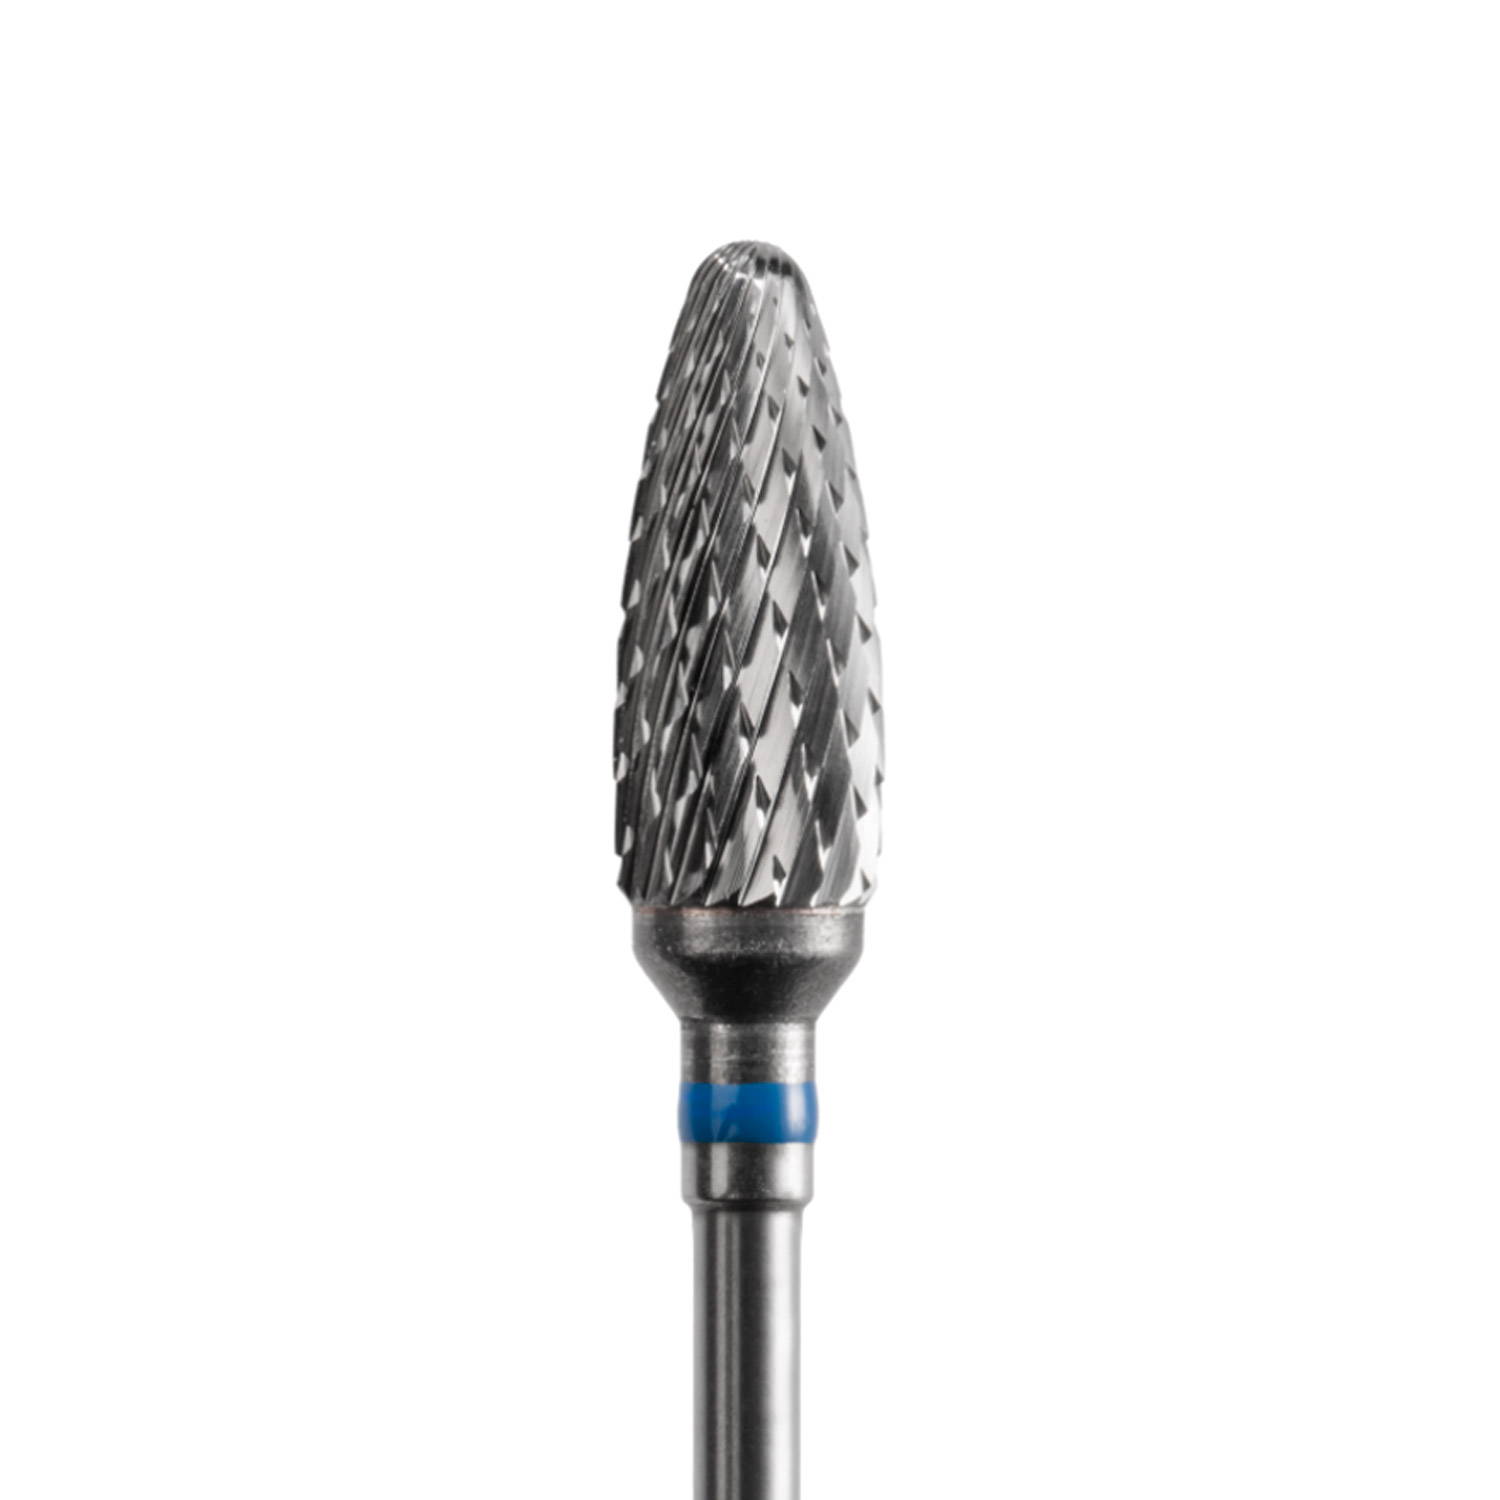 Acurata professional milling tool with moderate cross cut AC-72 ACURATA - 190 Series - Gel Removal